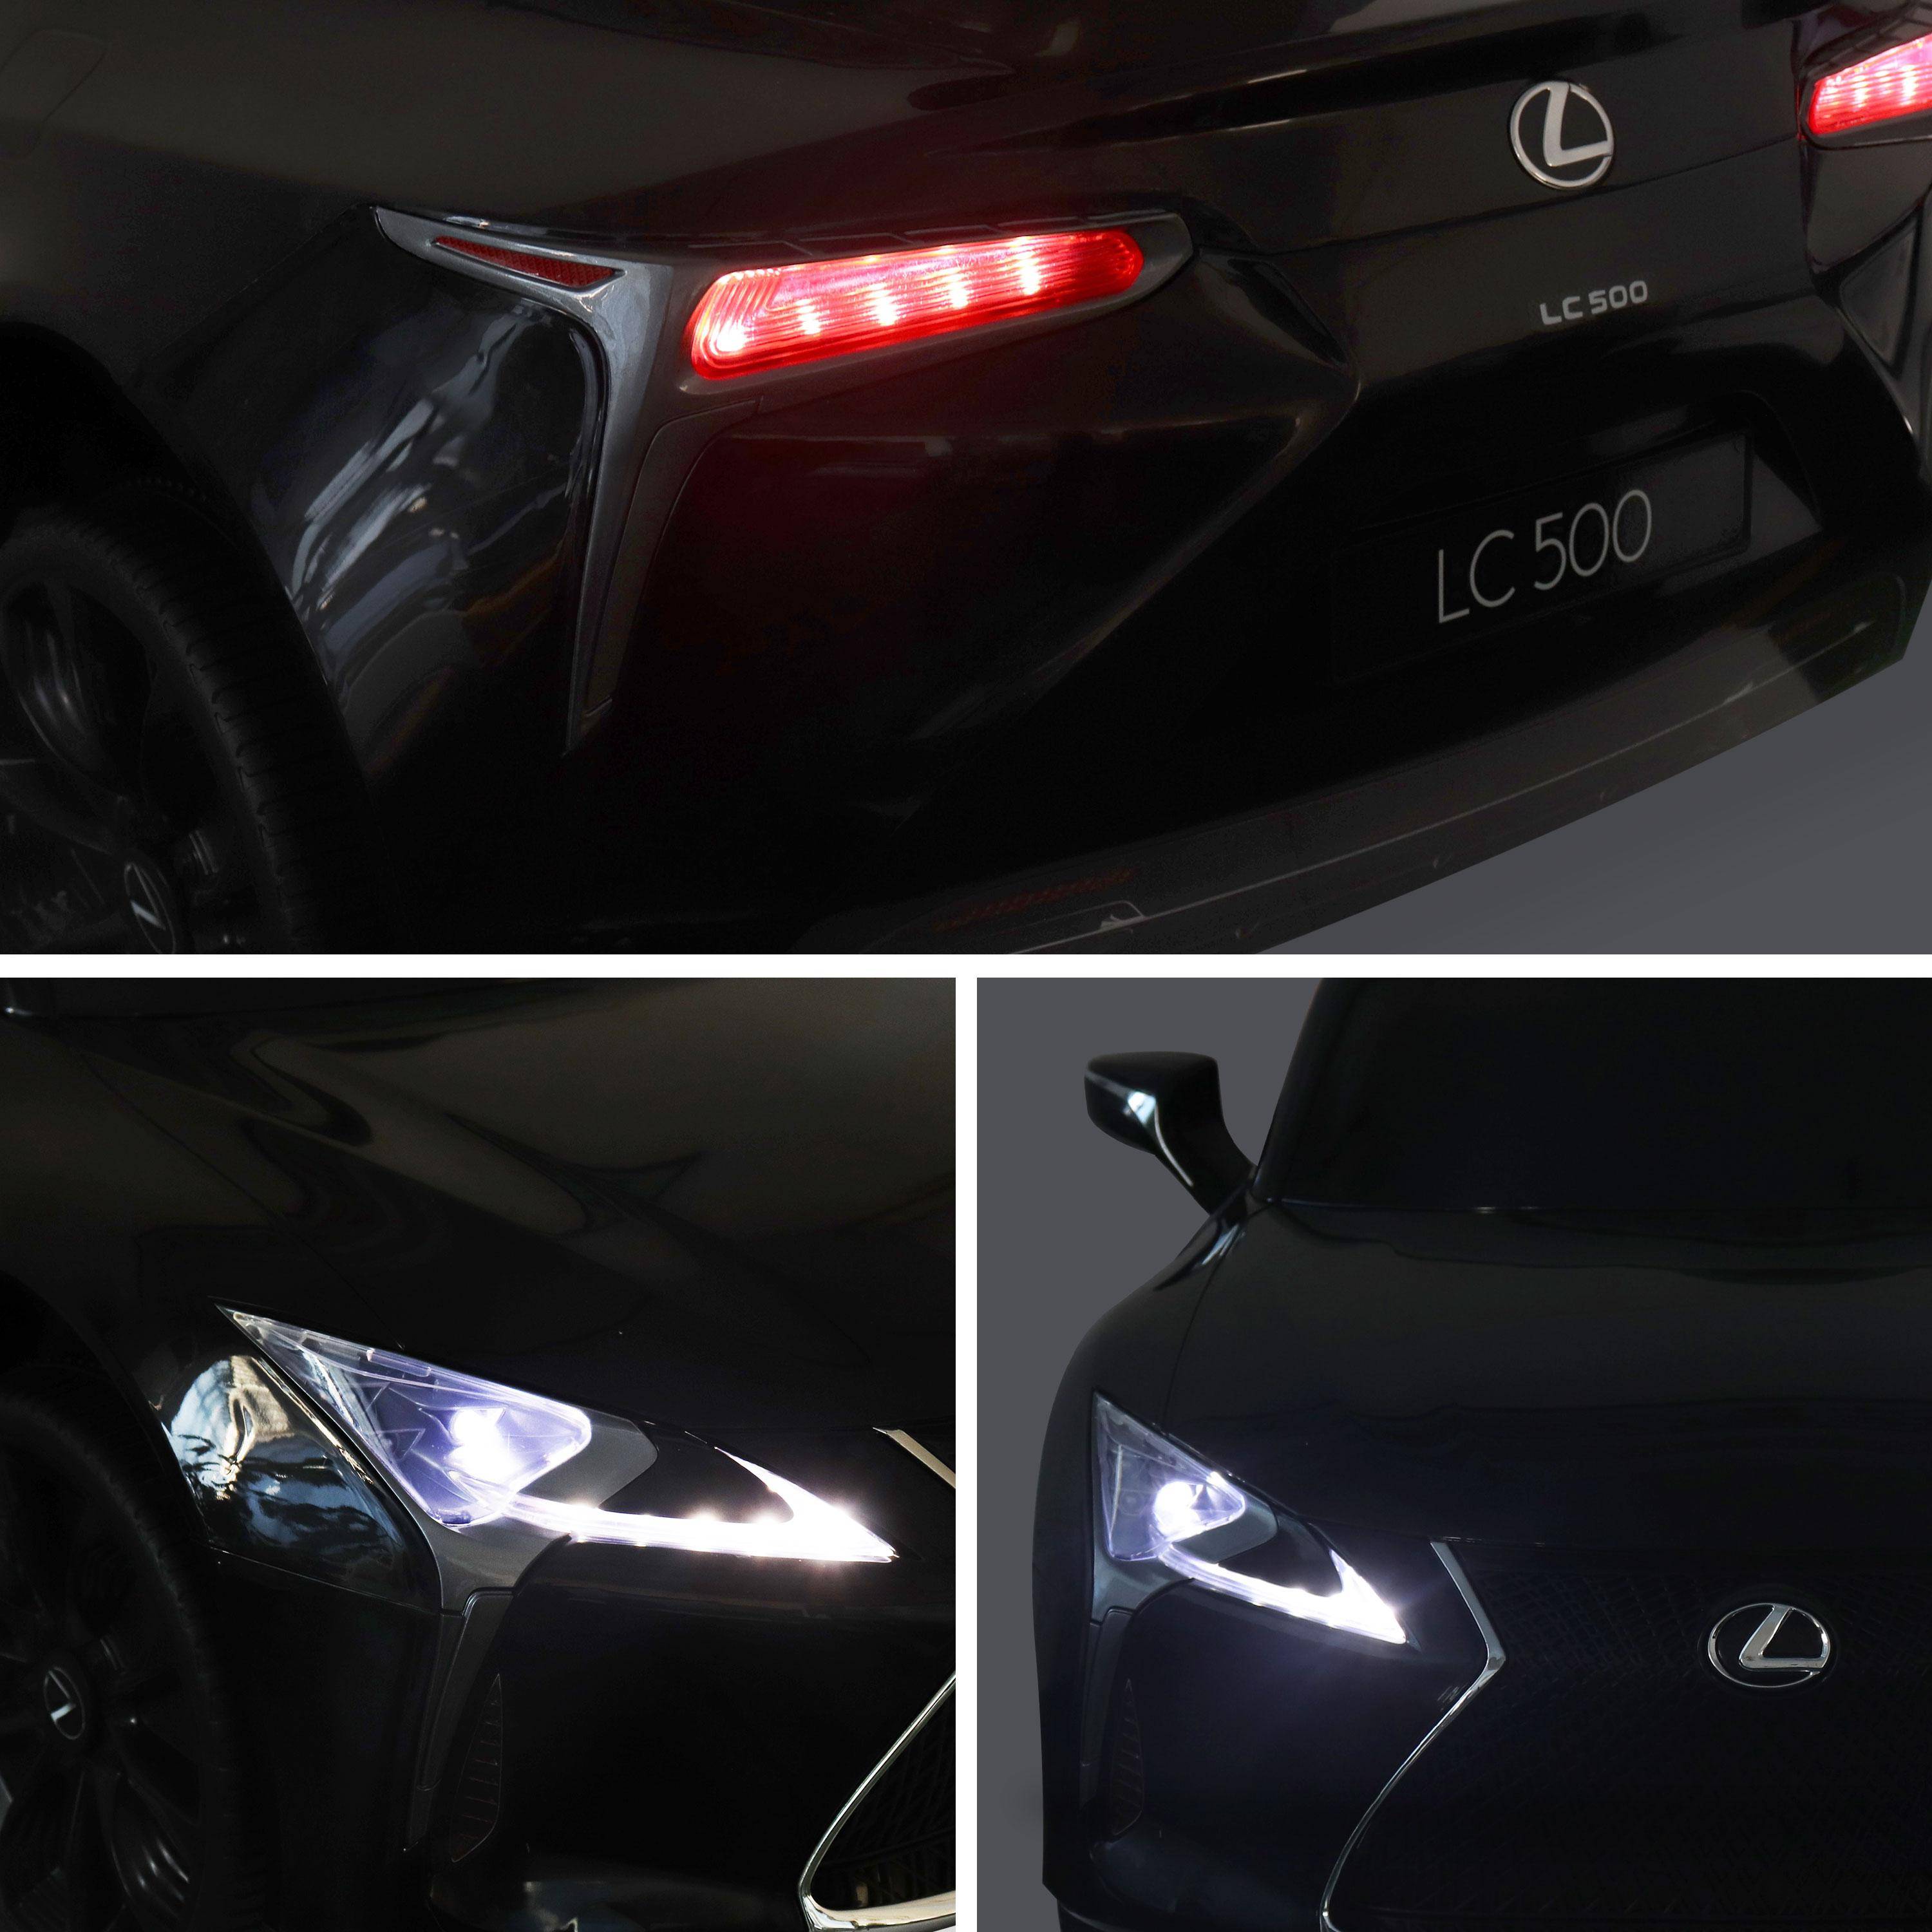 Children's electric car 12V, 1 seat, 4x4 with car radio and remote control - Lexus LC500 - Black,sweeek,Photo6